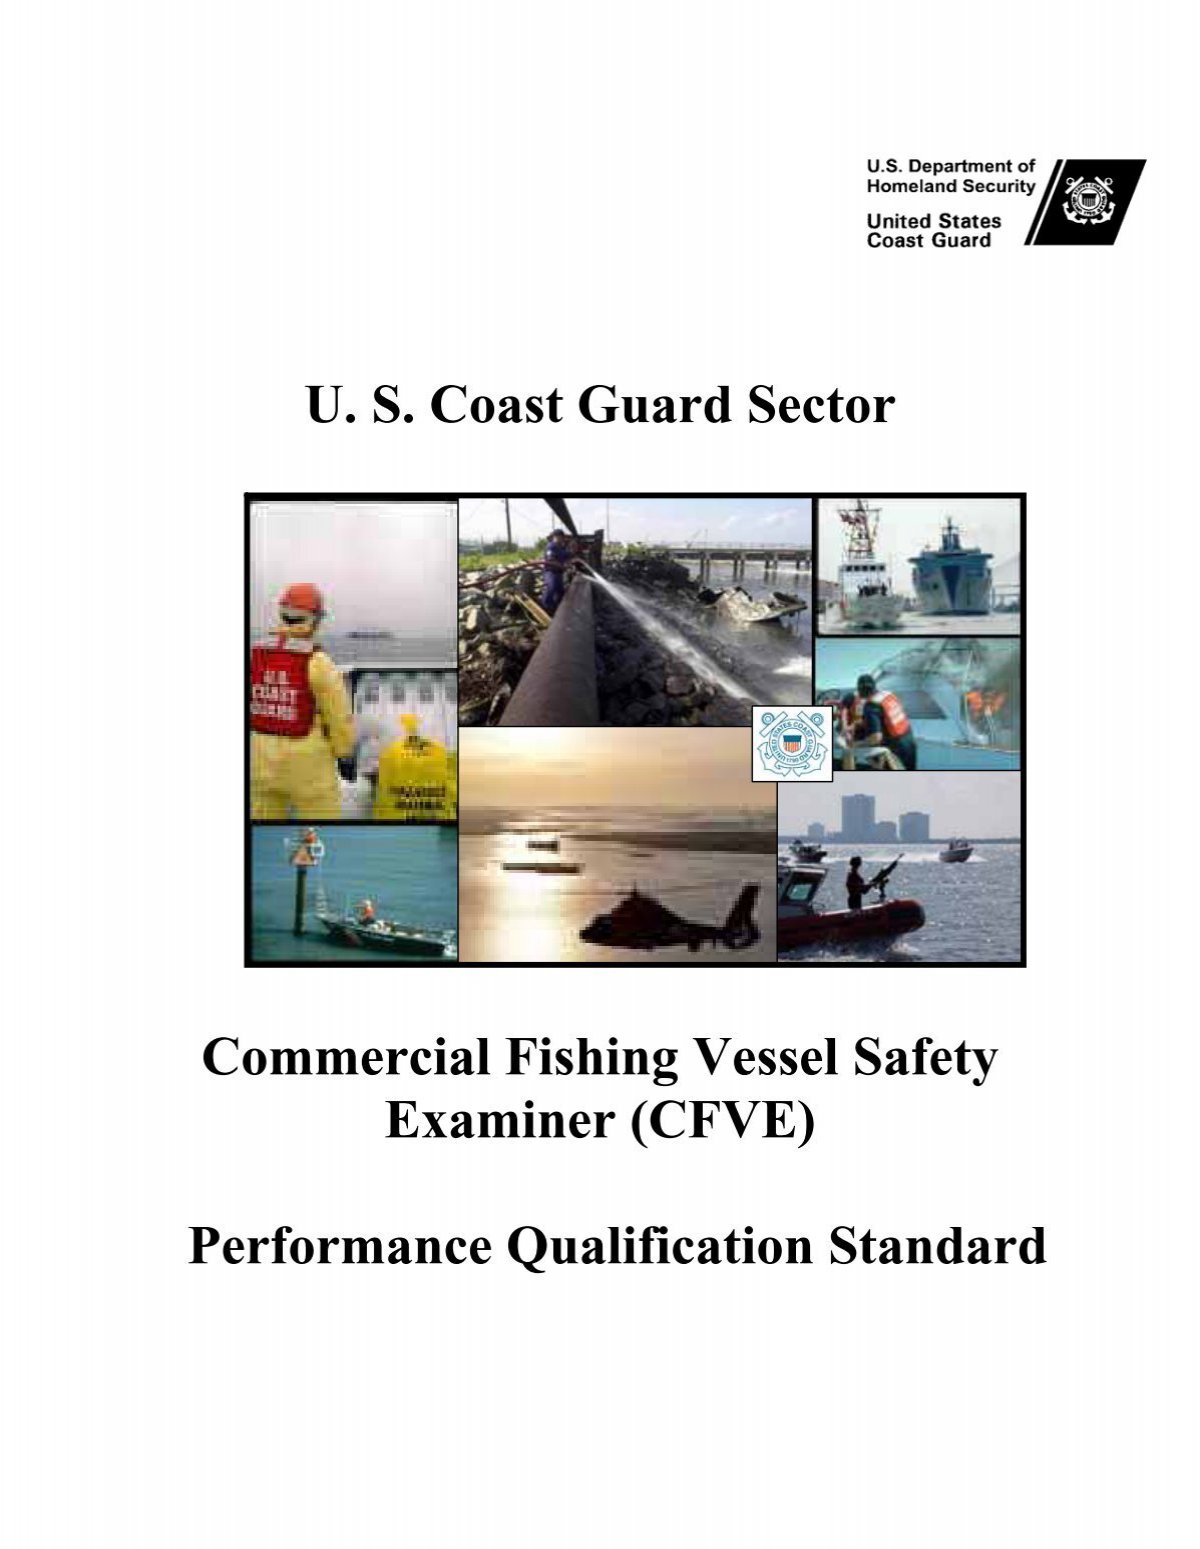 Commercial Fishing Vessel Safety Examiner PQS